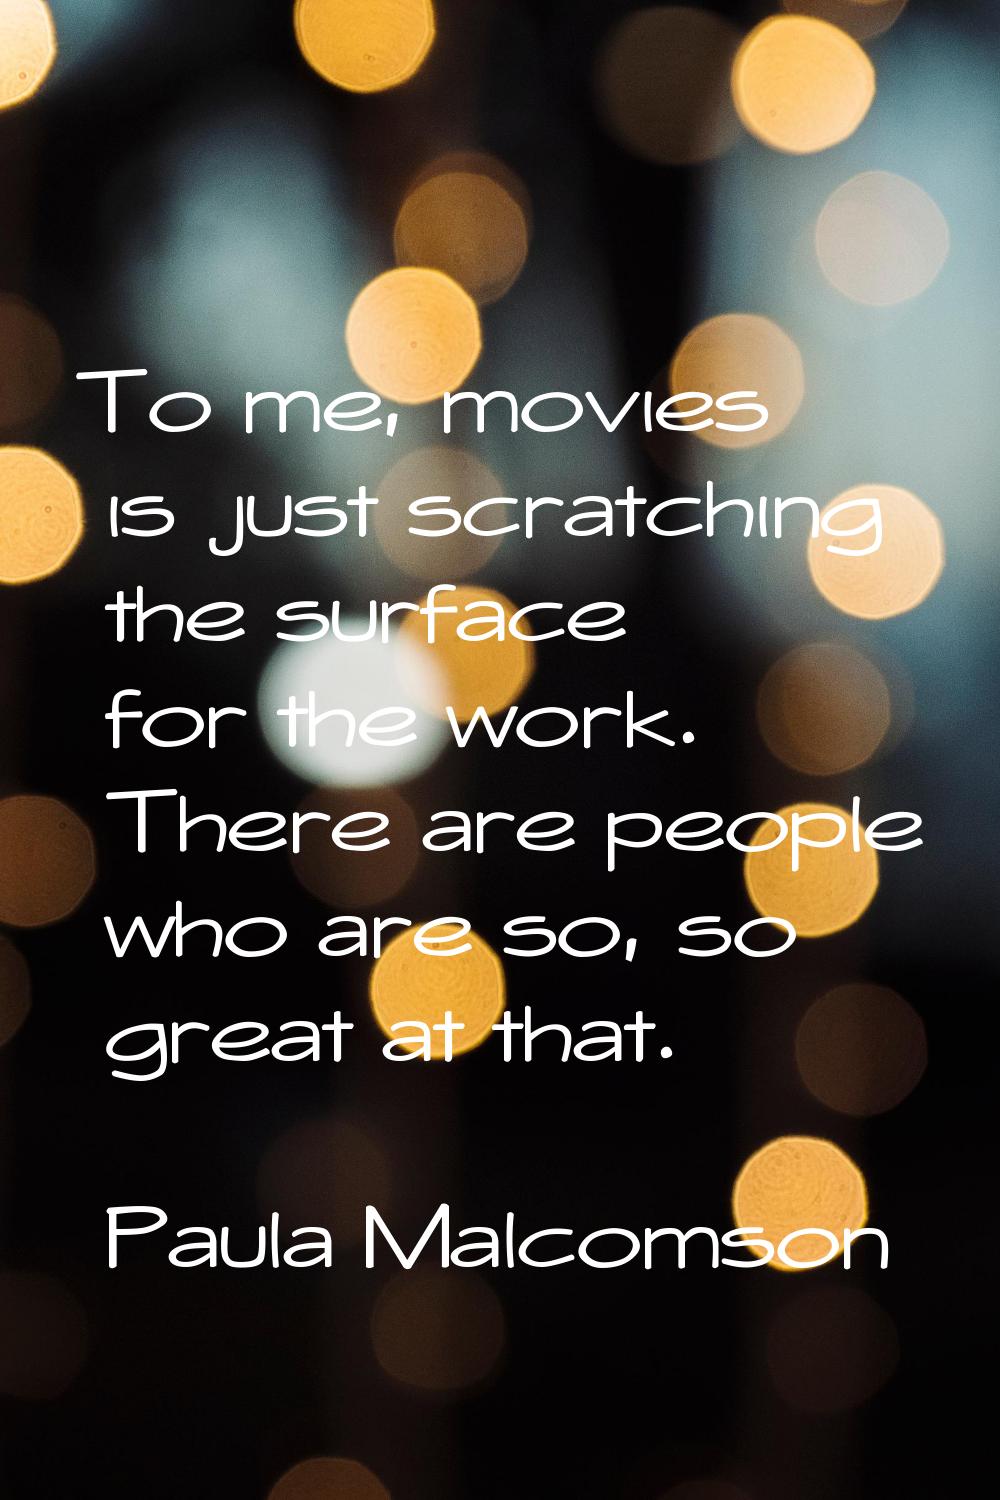 To me, movies is just scratching the surface for the work. There are people who are so, so great at